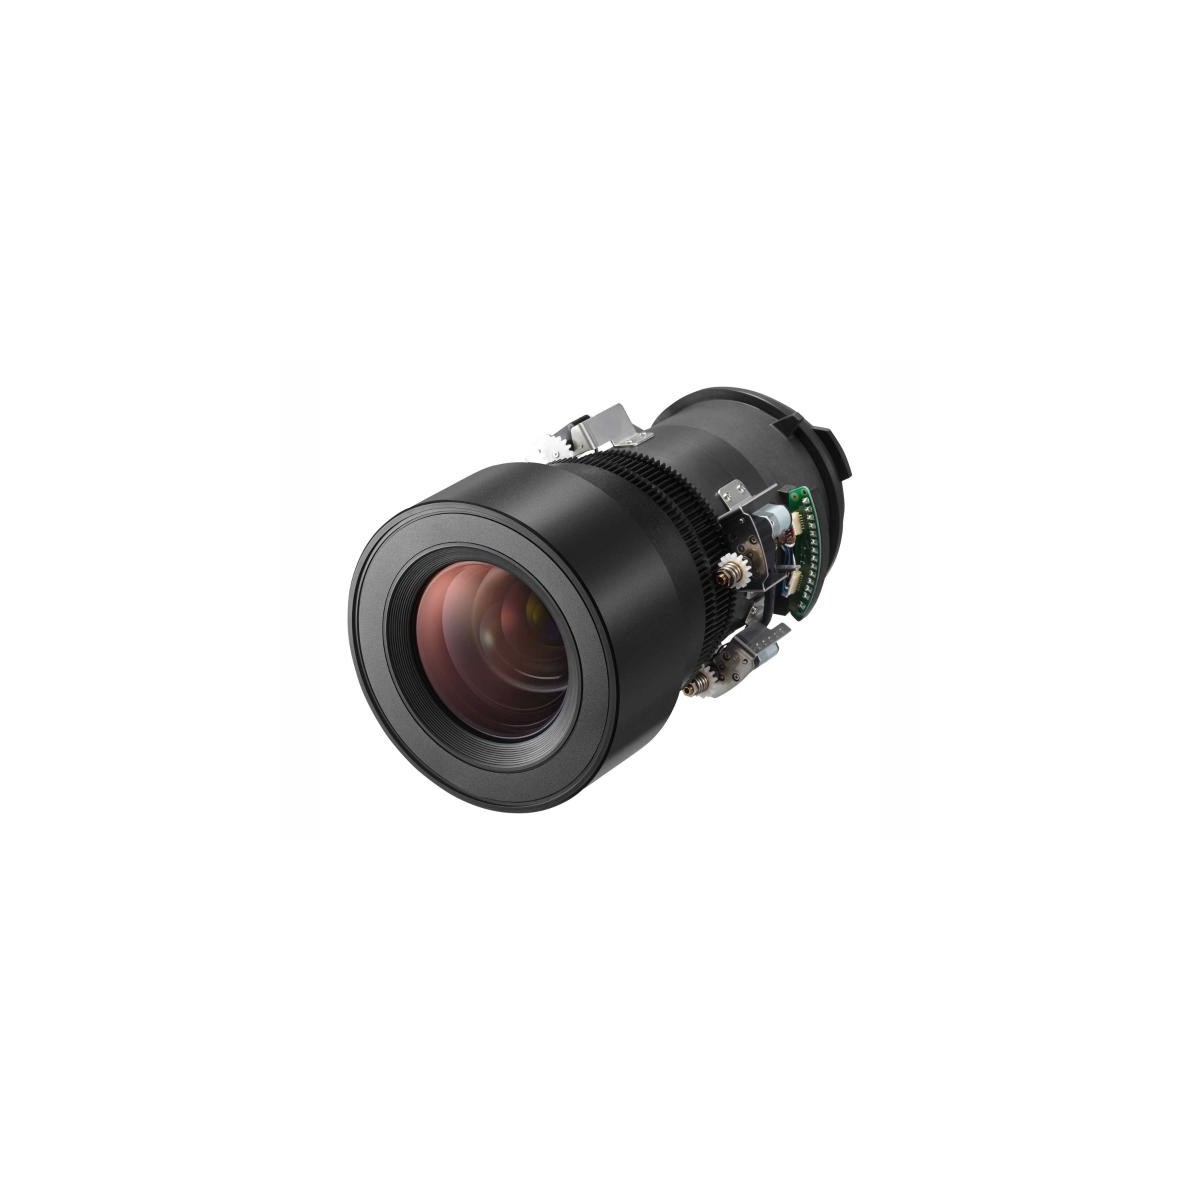 NP41ZL Middle Zoom Lens for PA3 Series - 1.30-3.02:1